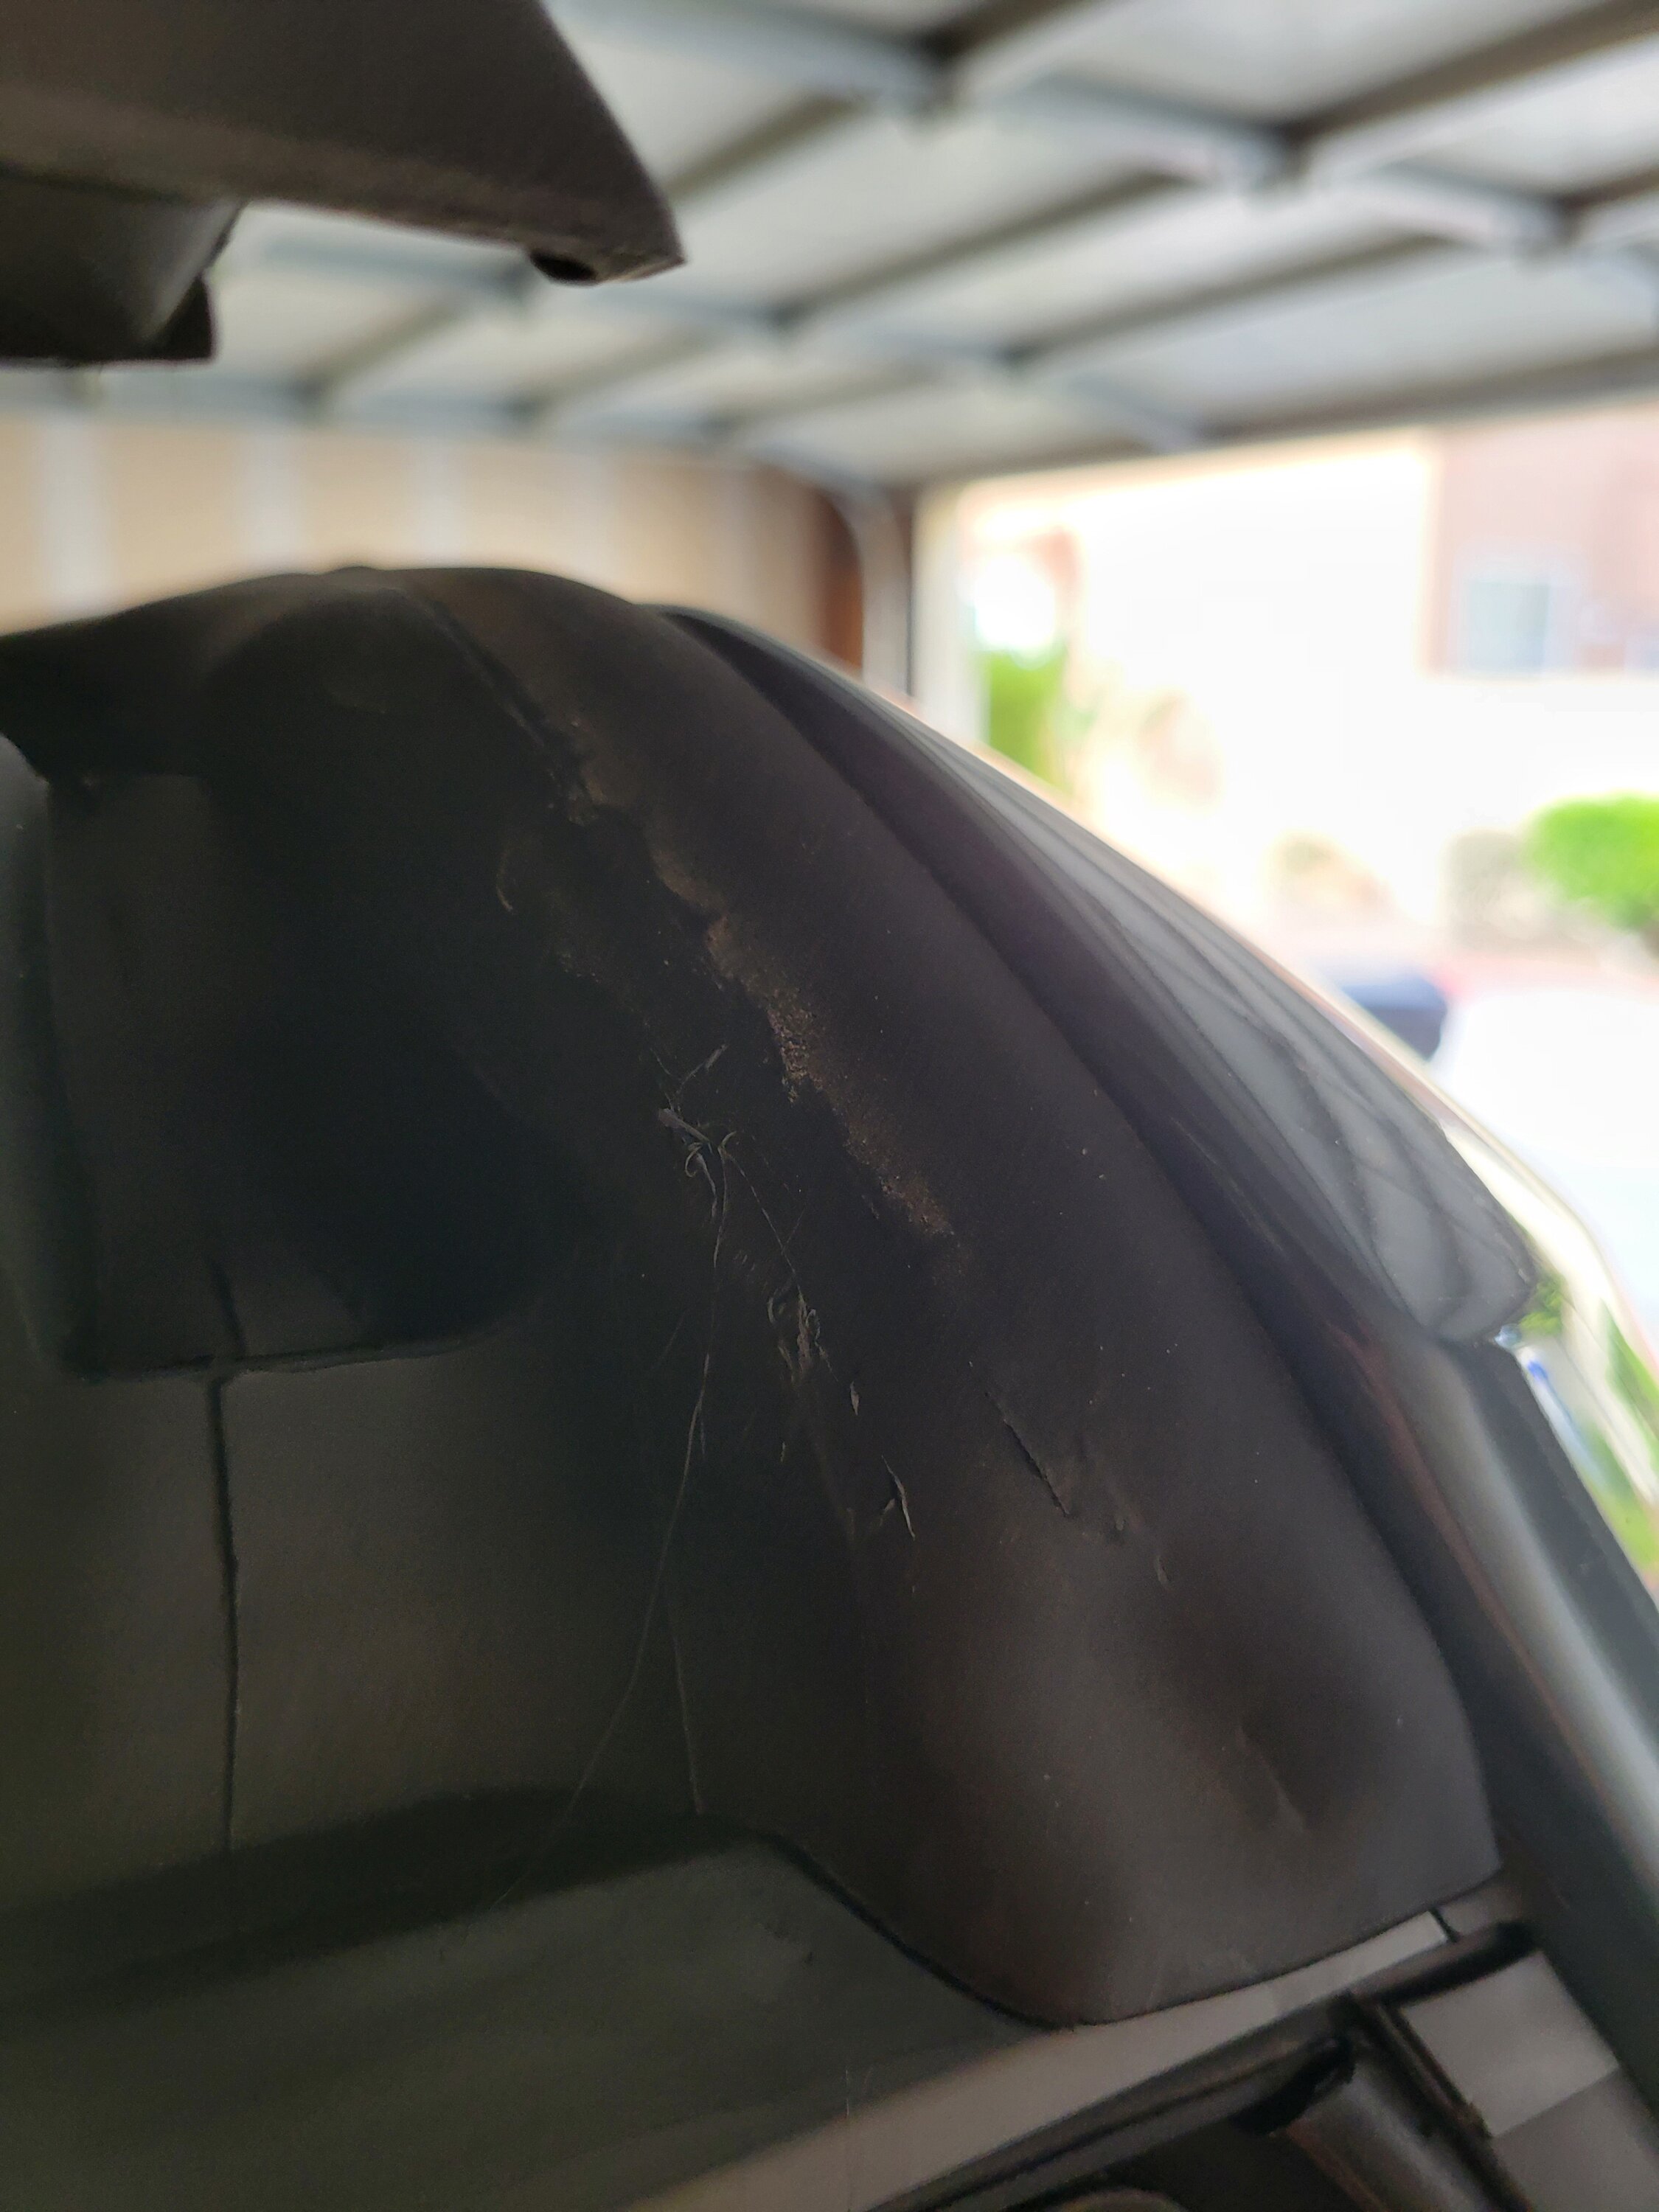 Ford Bronco Melting sealant/adhesive from soft top? 20220622_172458